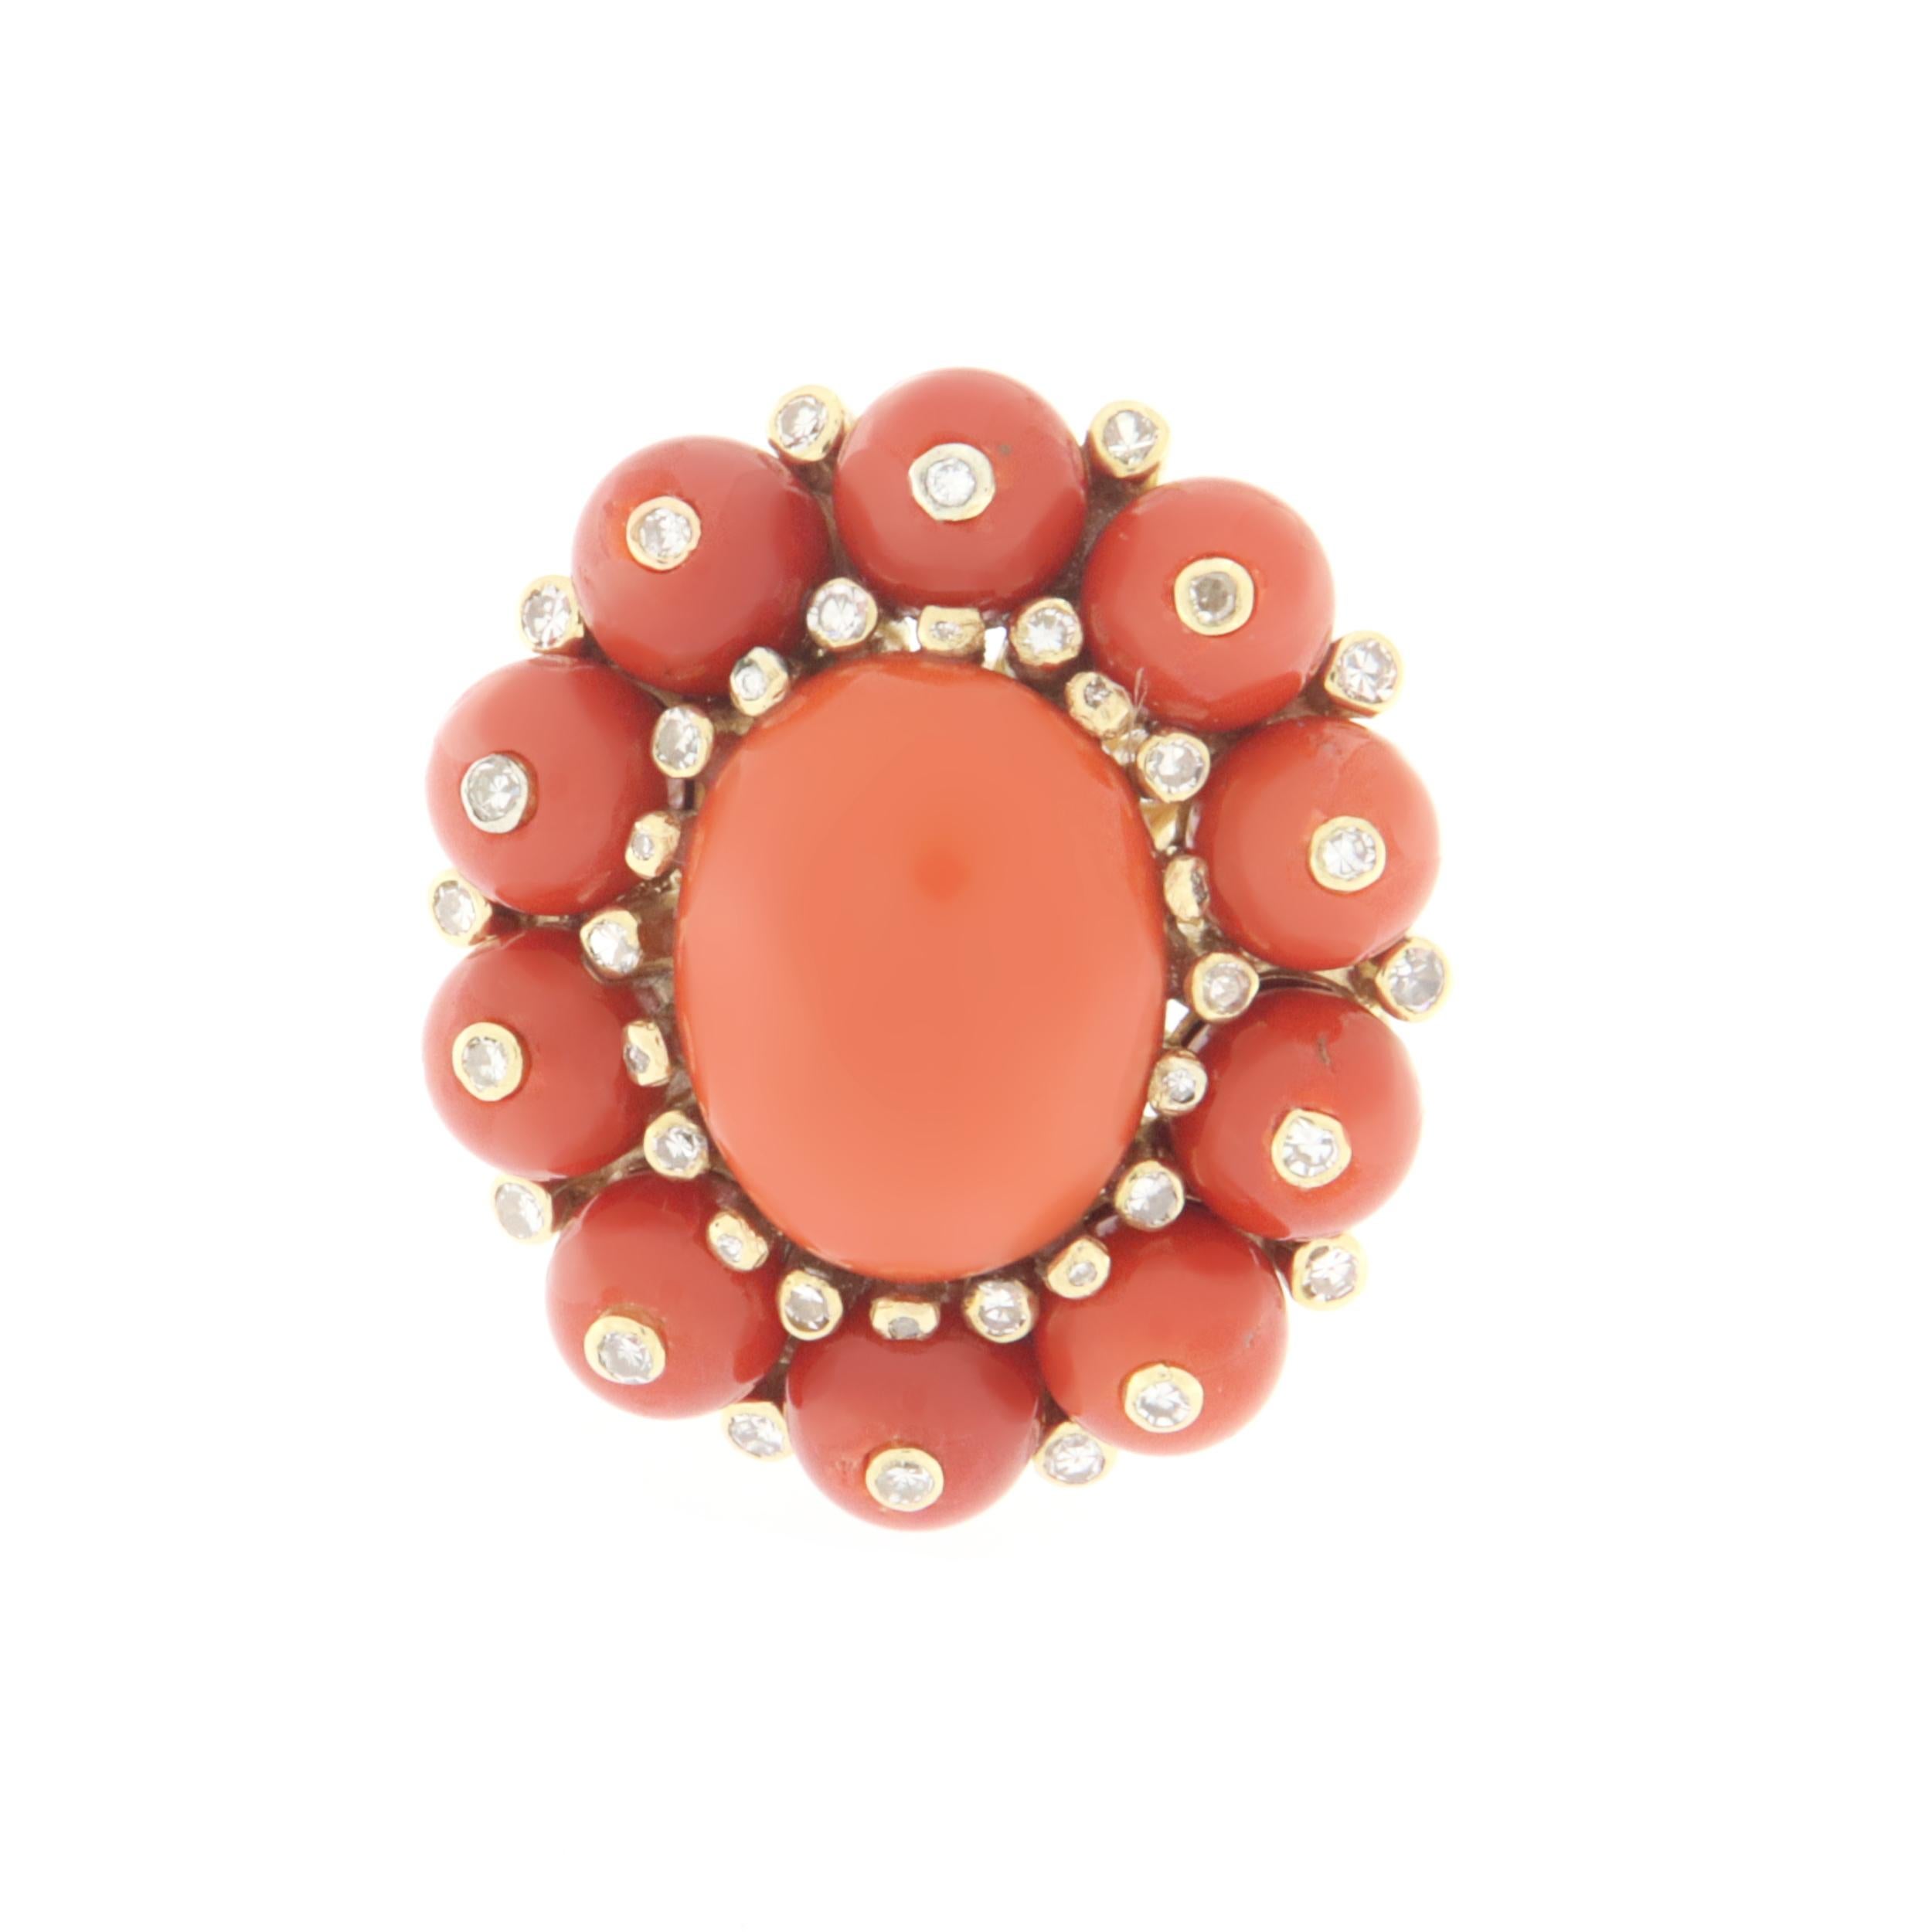 Fantastic 18 karat yellow gold cocktail ring. Handmade by our artisans assembled with diamonds and natural coral

Ring total weight 15.10 grams
Diamonds total weight 0.63 karat
Coral 5.50 grams 
Ring size 8.5 US 18 Ita
(all rings are can be resized)